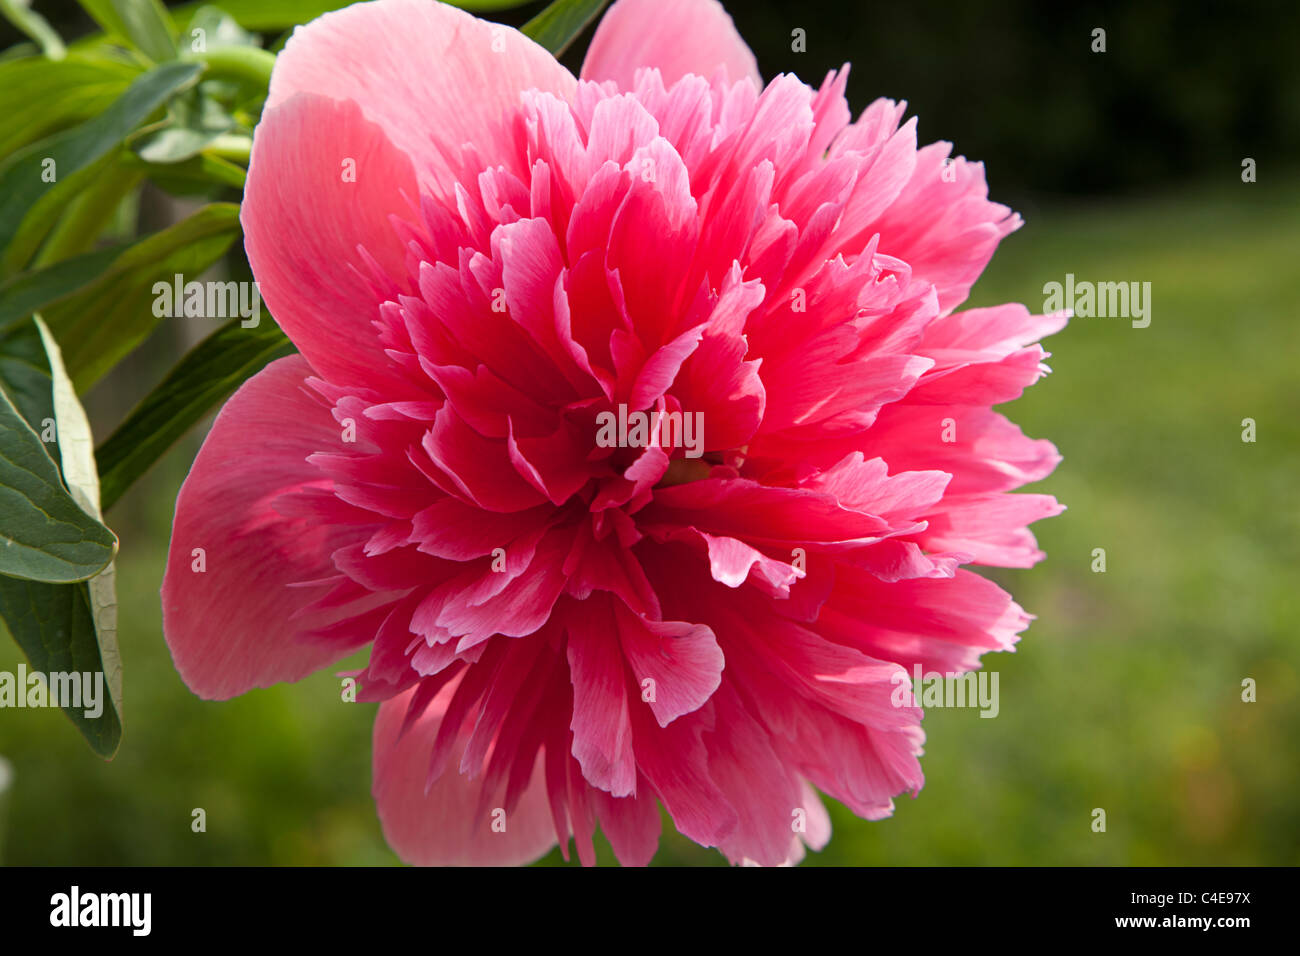 Close up of the flower of a red Peony rose (Paeonia sp.), Holland Stock Photo